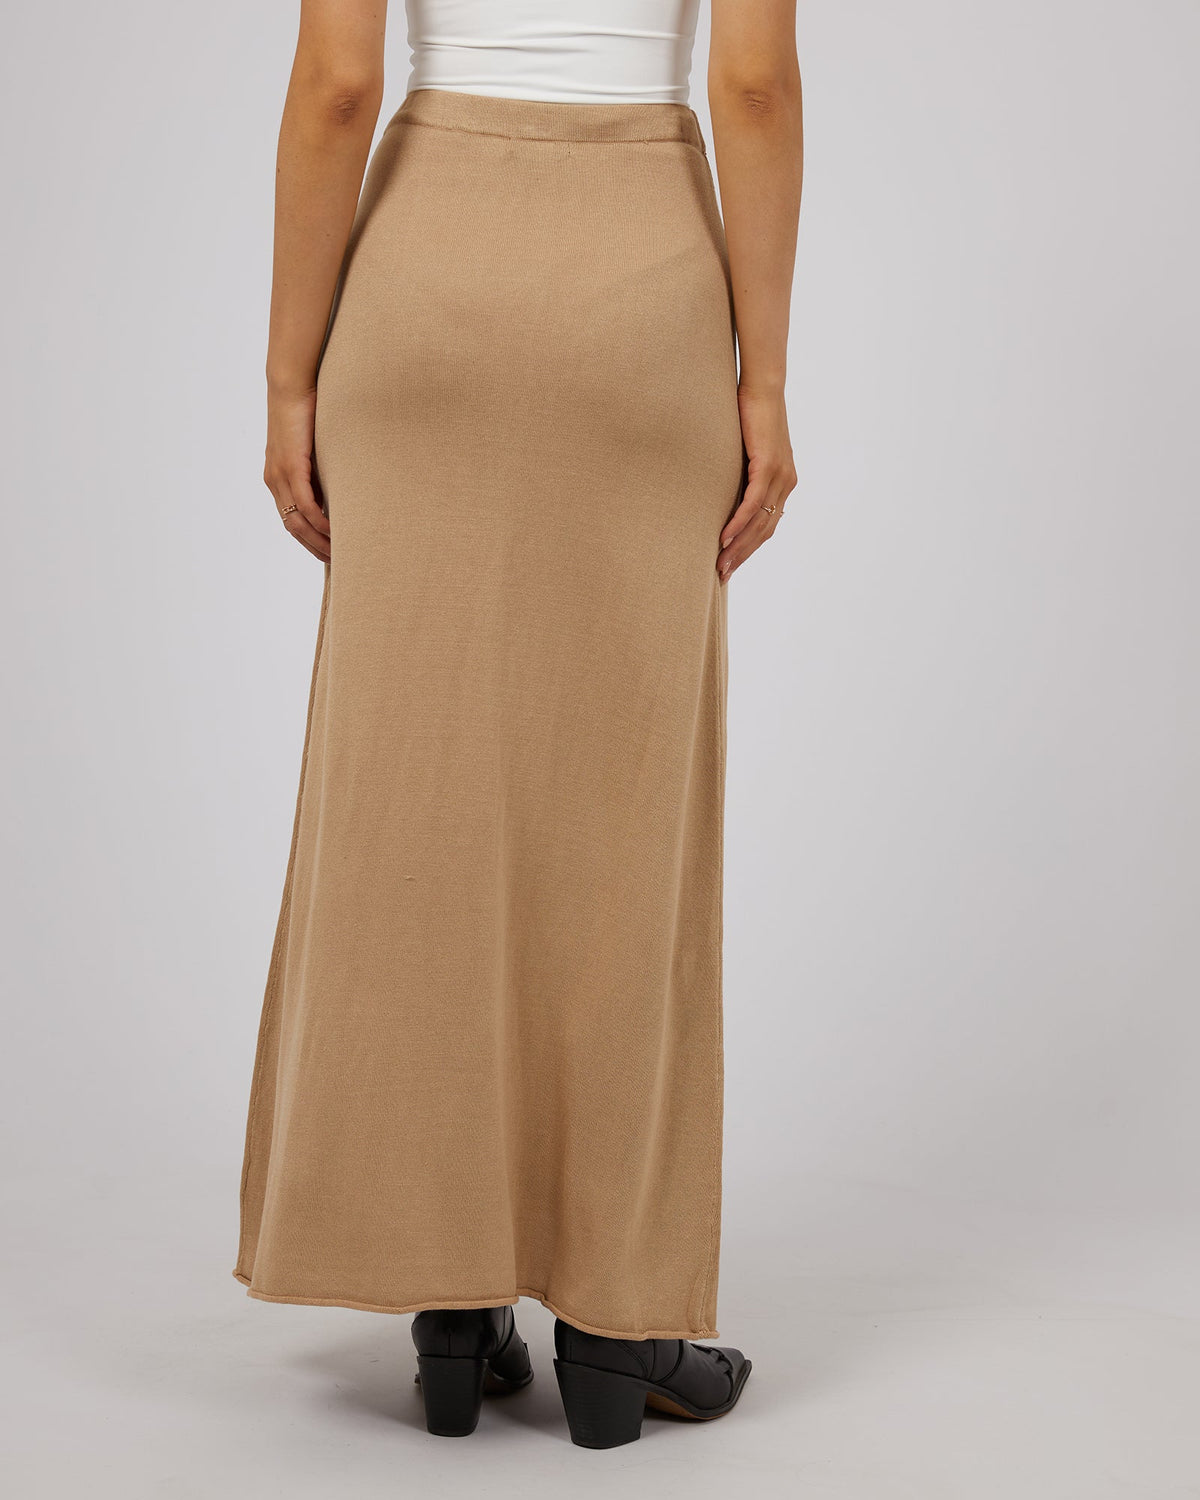 All About Eve-Eve Knit Skirt Oatmeal-Edge Clothing